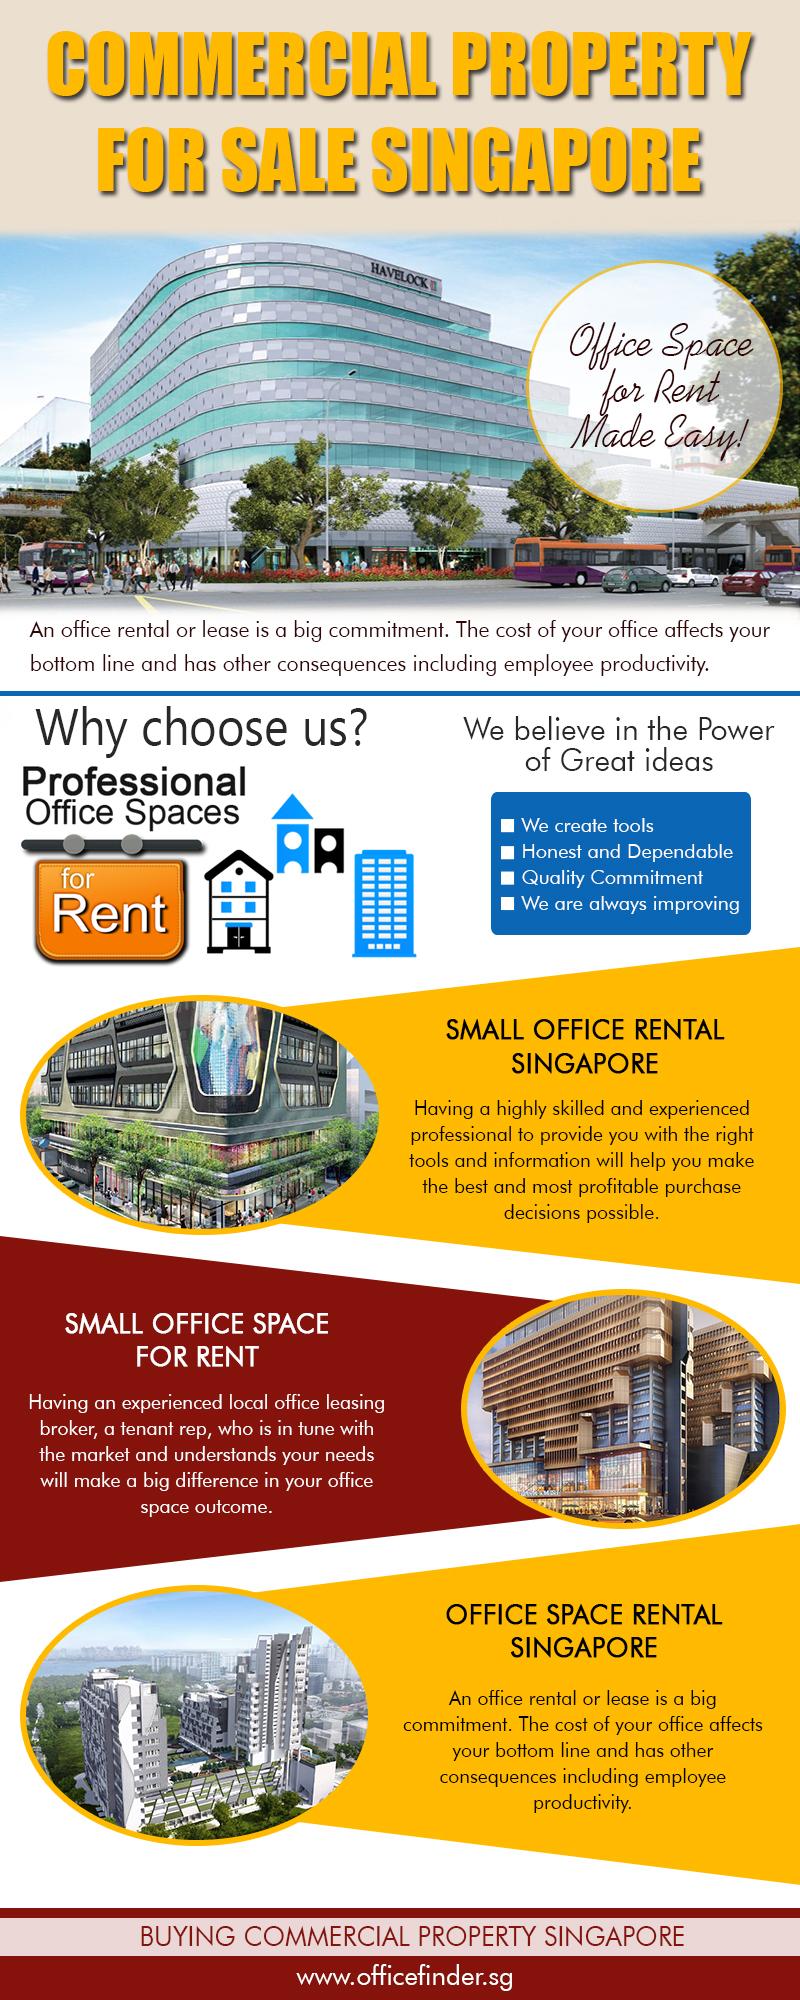 Small Office Space For Rent (